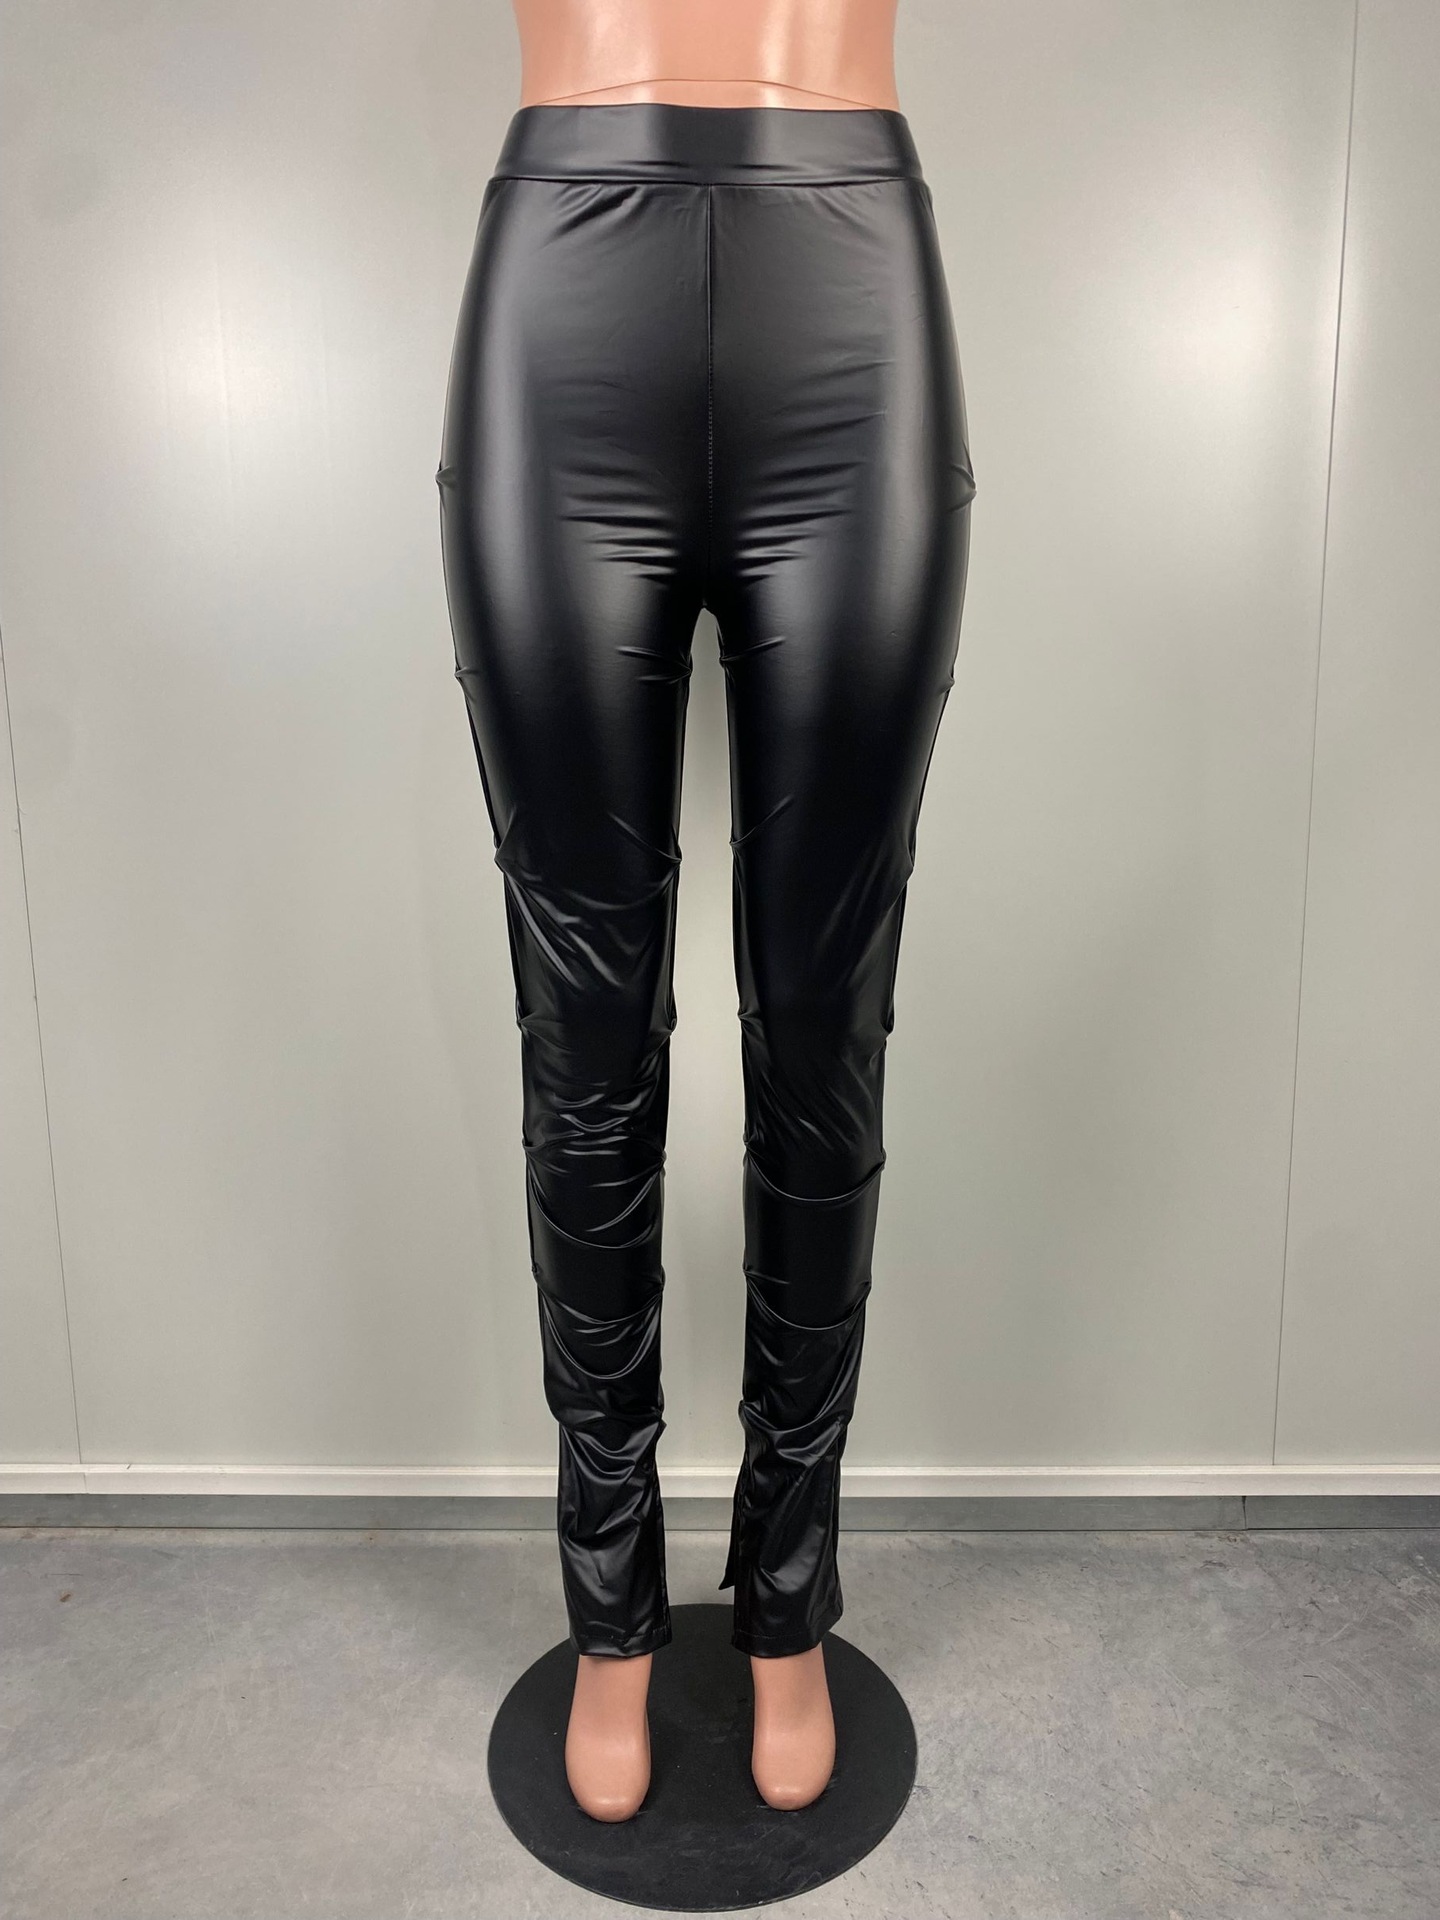 Cool Wholesale leggings sexy shiny pants In Any Size And Style